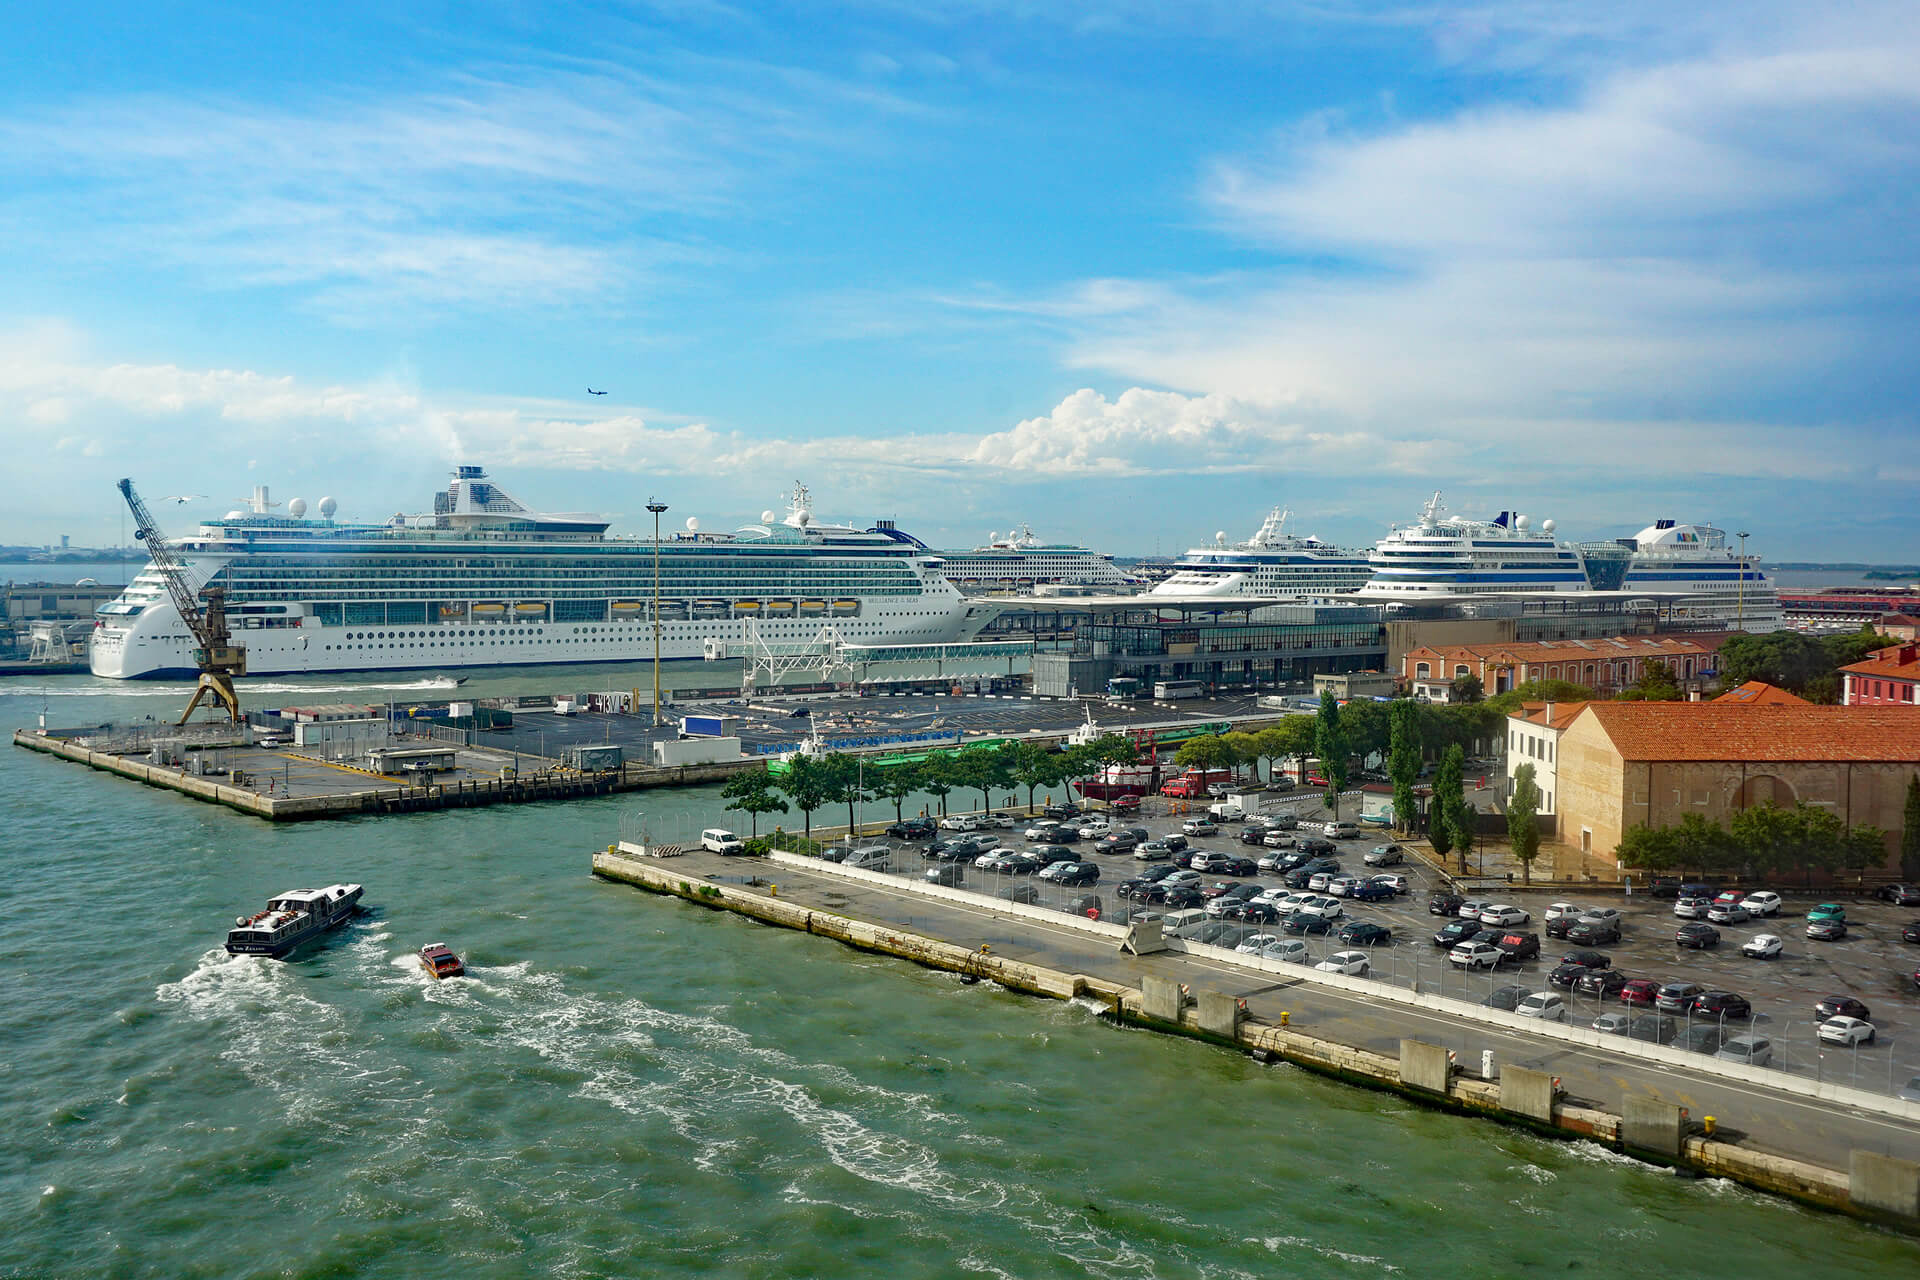 Cruise ships at the passenger terminal in the Port of Venice